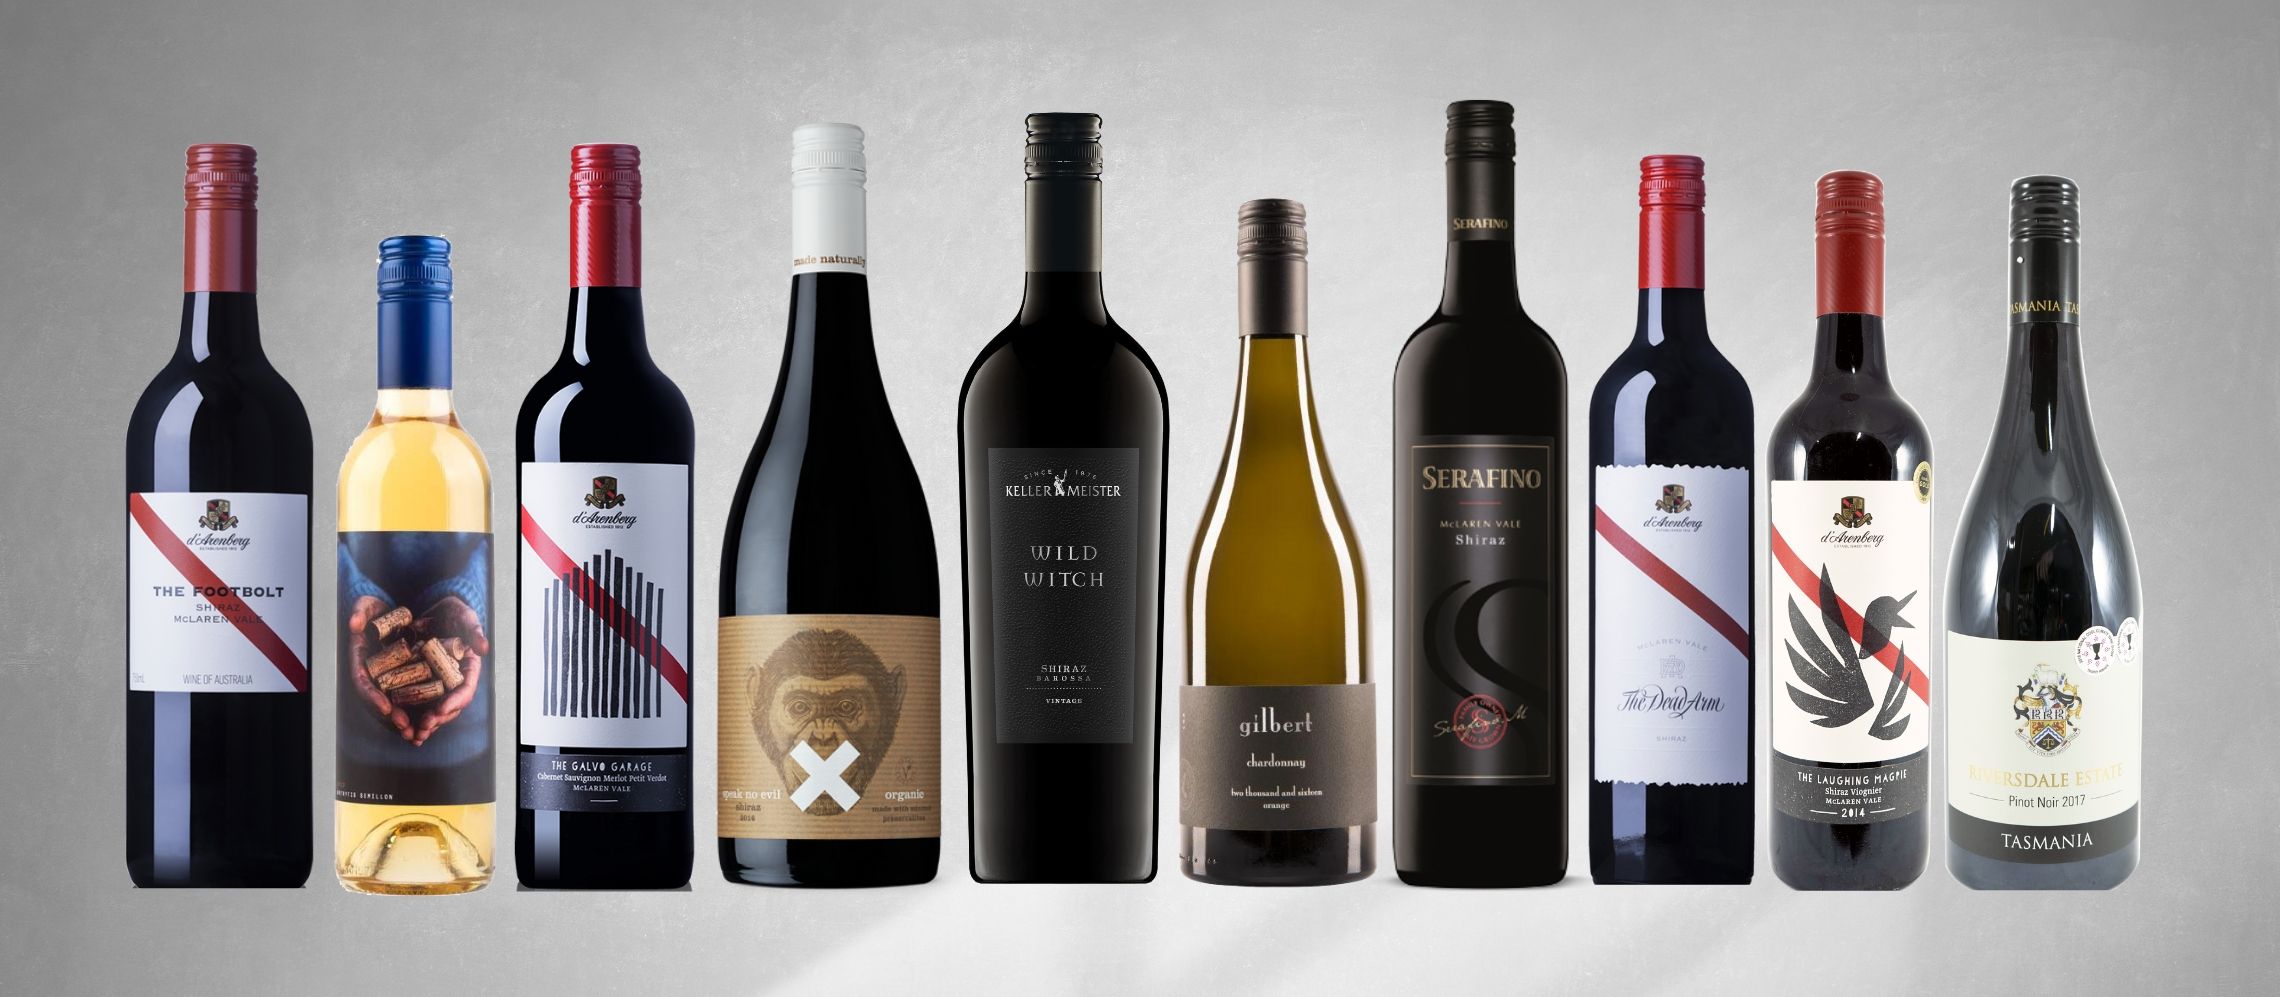 Photo for: 10 Must-Try Australian Wines of 2019